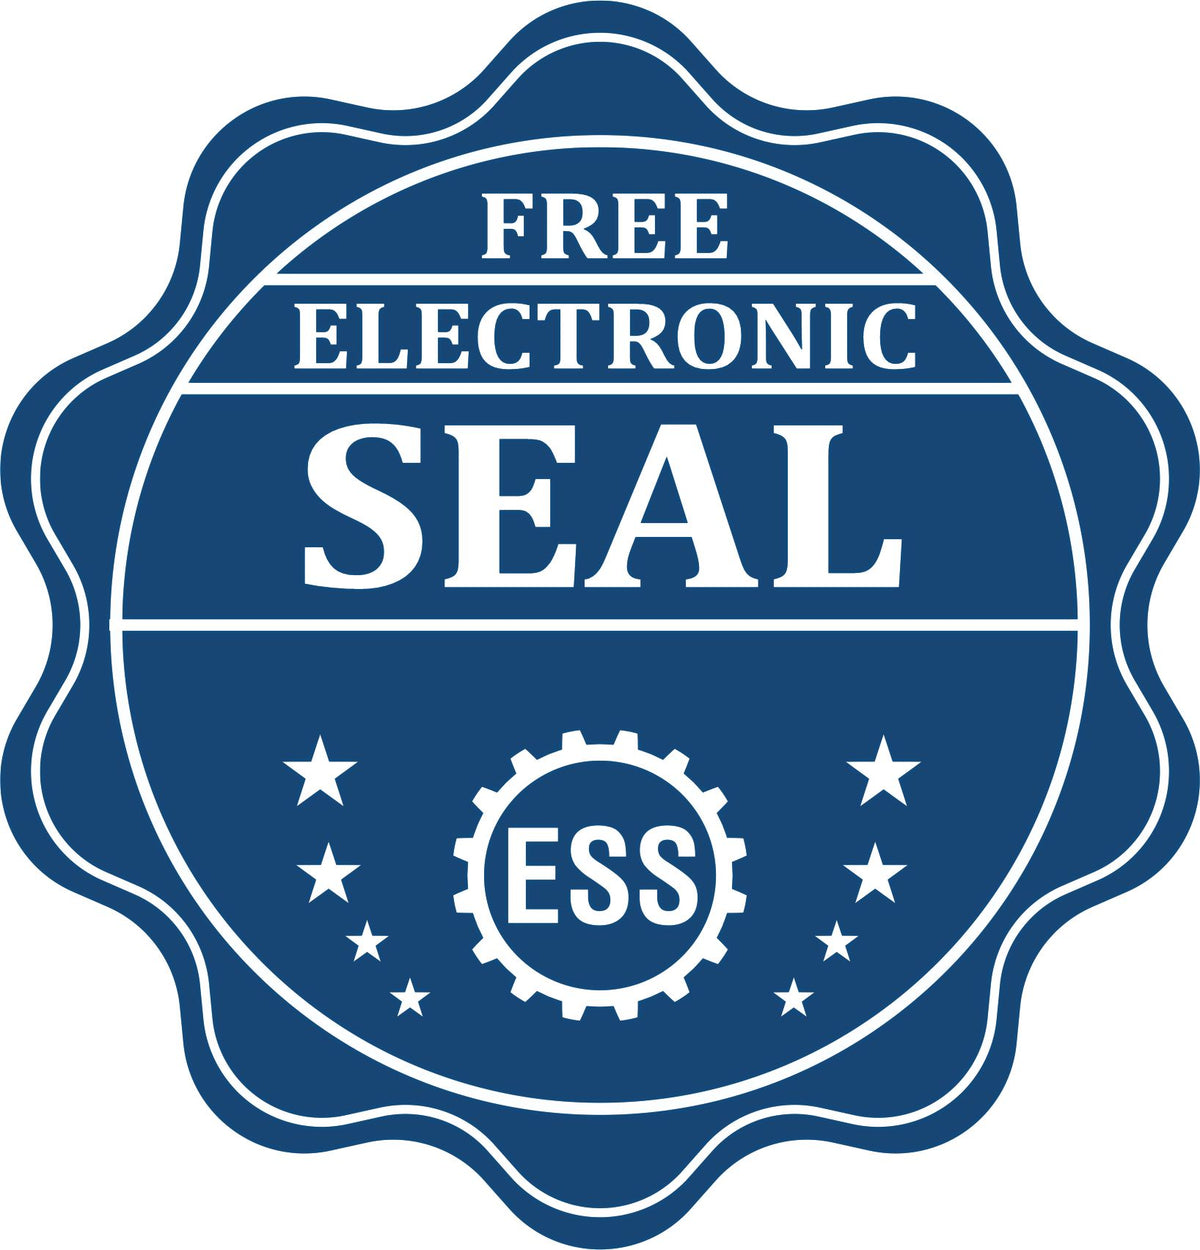 A badge showing a free electronic seal for the Arizona Desk Surveyor Seal Embosser with stars and the ESS gear on the emblem.